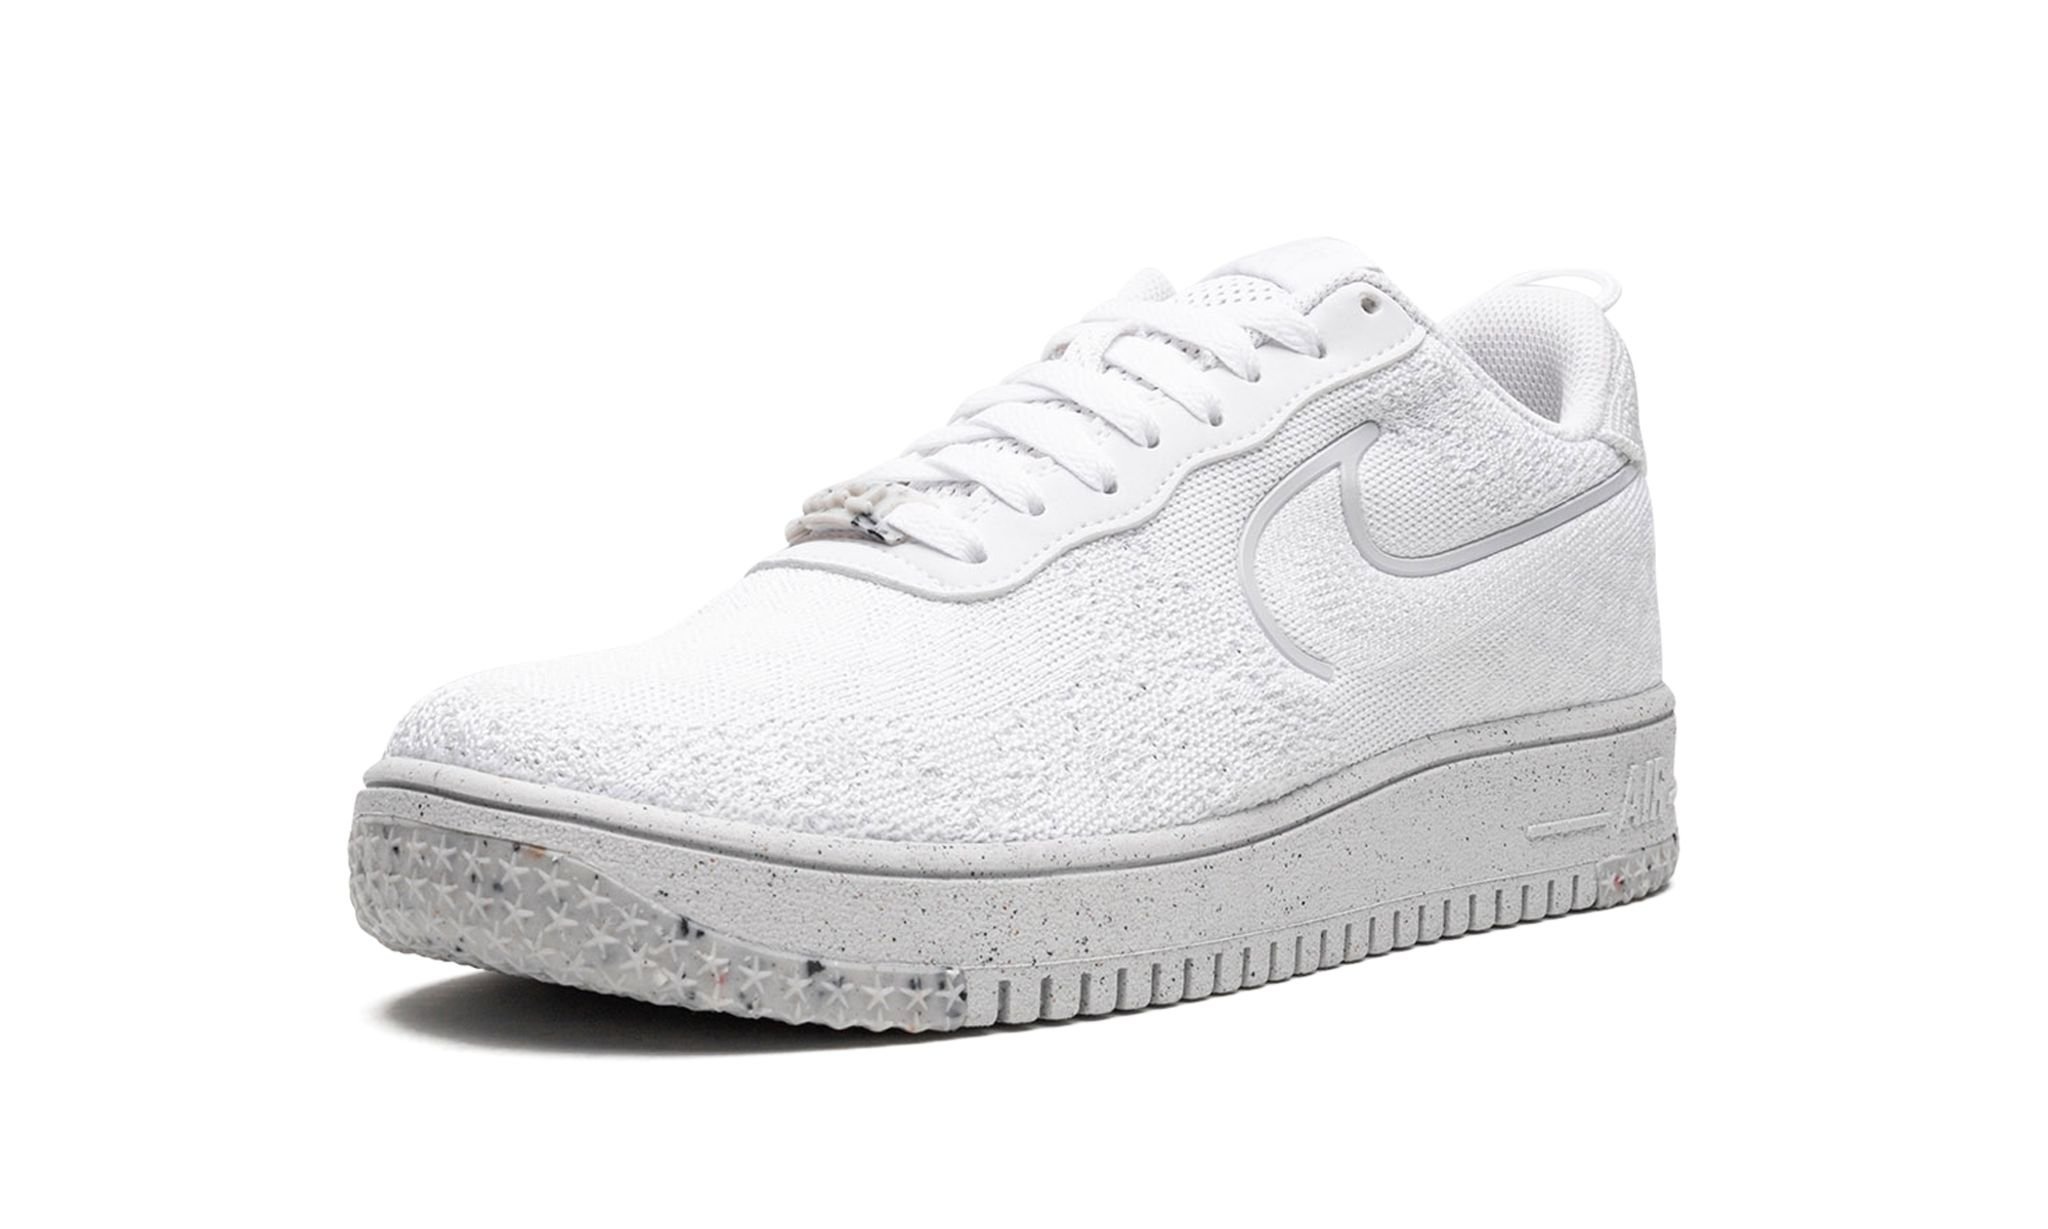 AF1 CRATER FLYKNIT NN "Whiteout" - 4